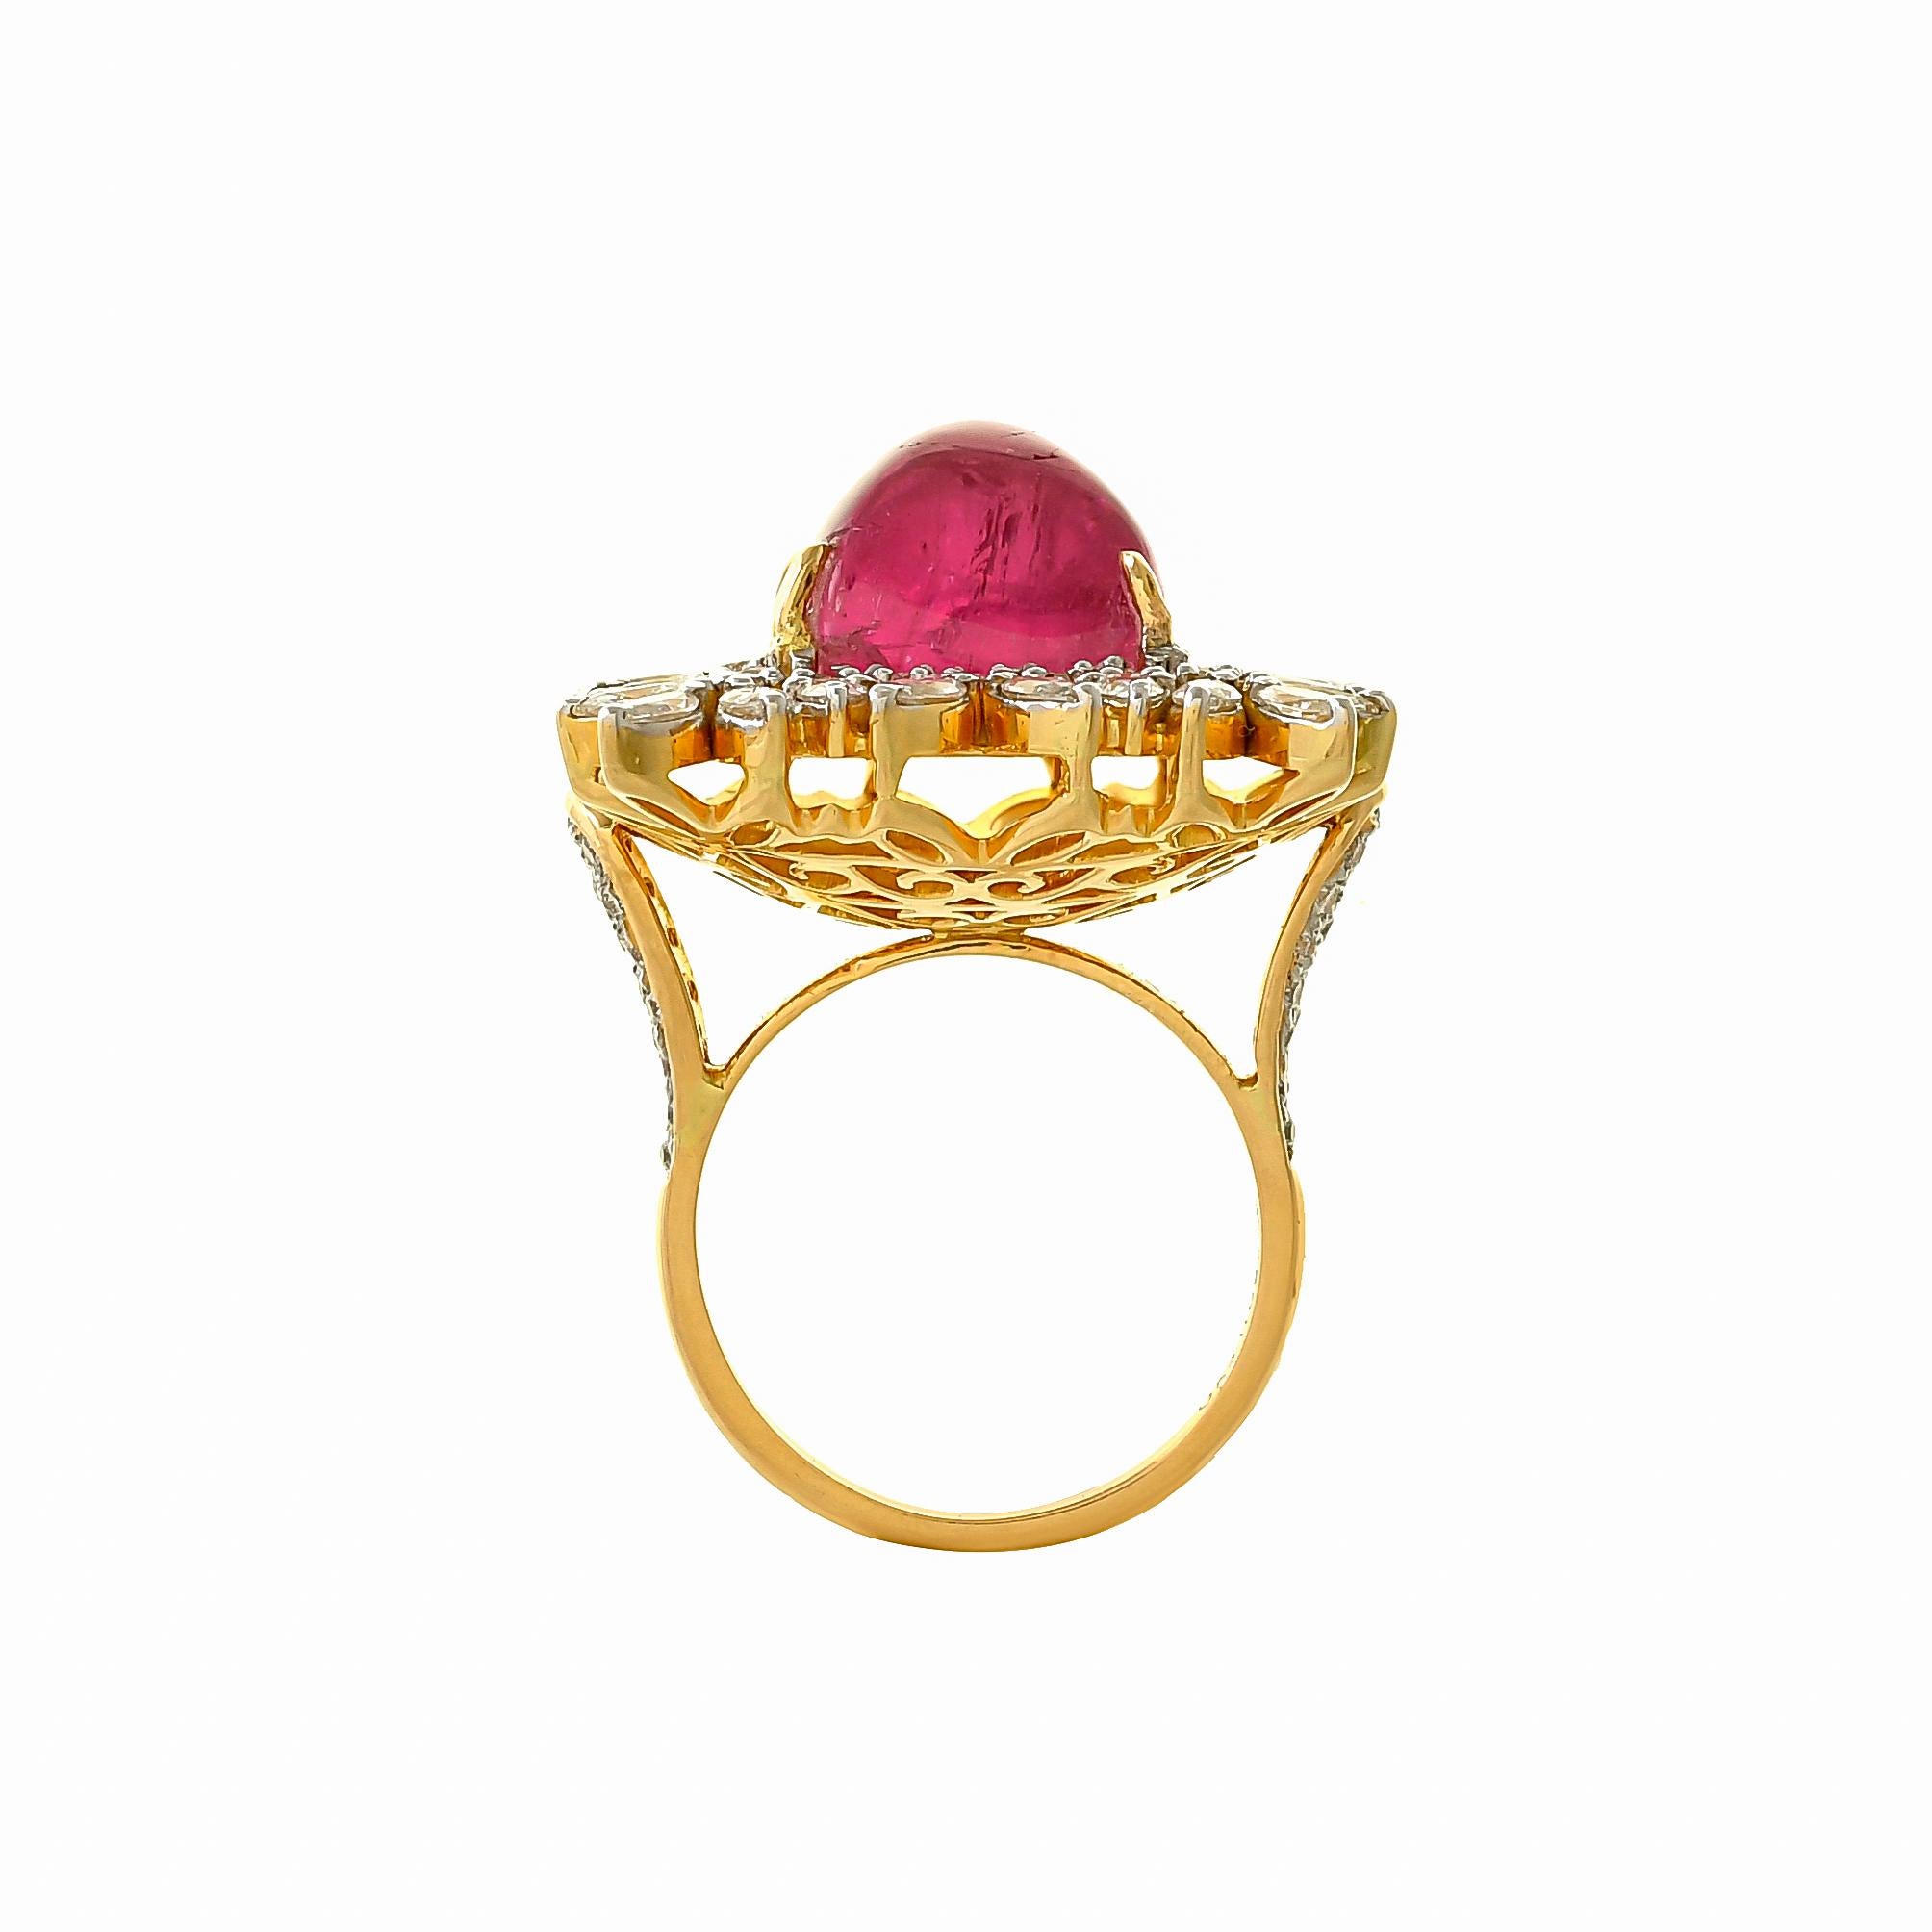 One-of-a-kind treasures from our limited edition collection handcrafted in 18kts yellow gold featuring gorgeous rubellite cabochon weighing approximately 14.00 carats with a diamond surround further accented by marquis cut diamonds with a total